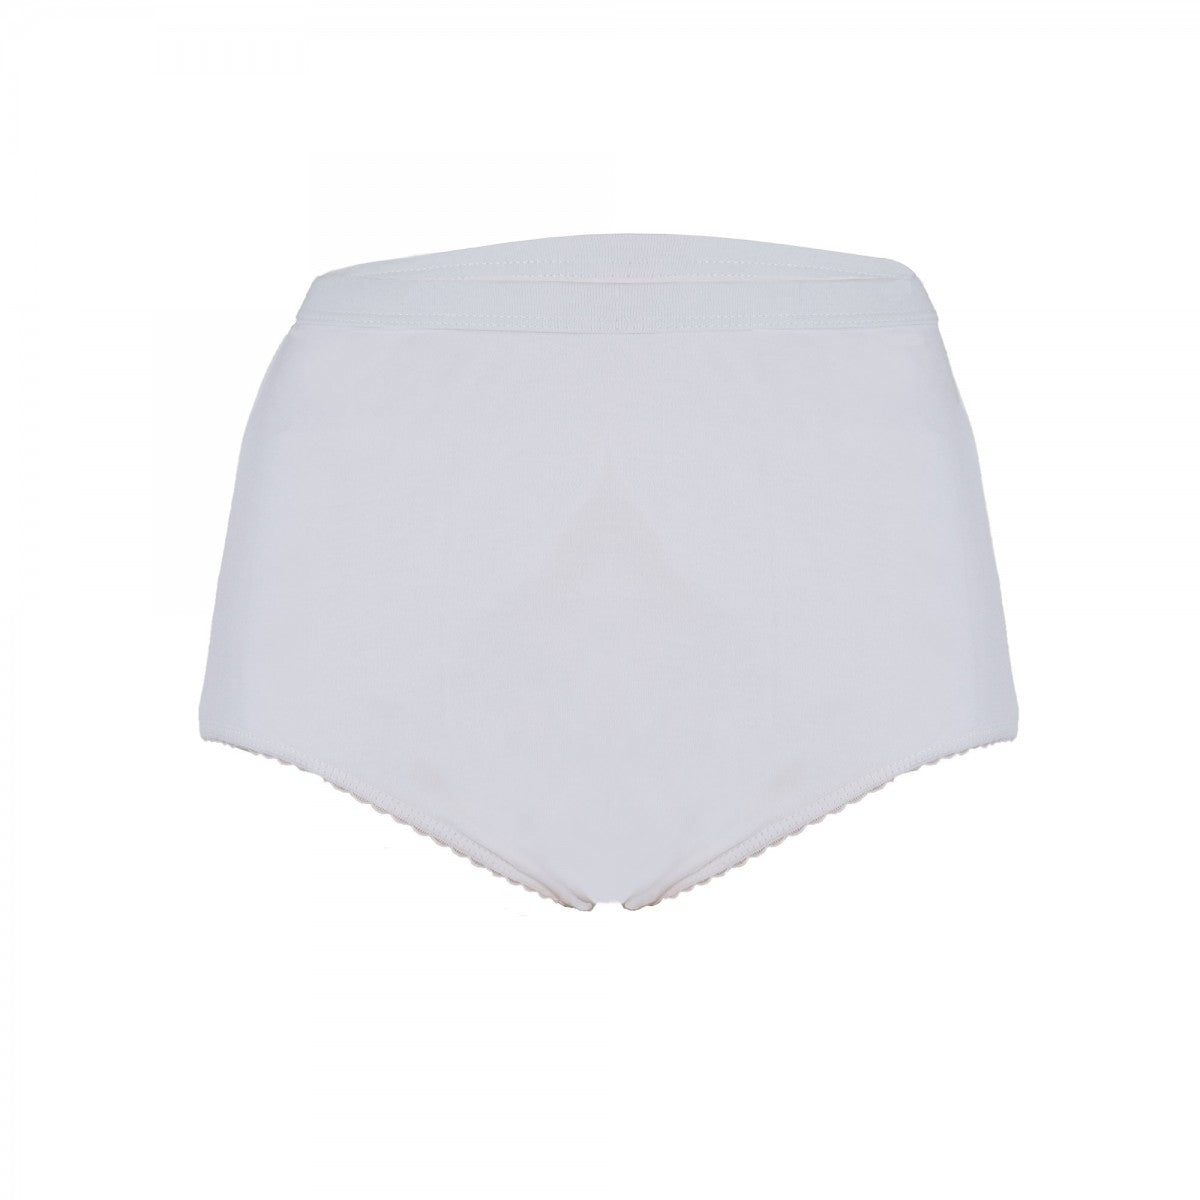 Reusable-Cotton Ladies Brief Super Absorbency with Waterproof Backing